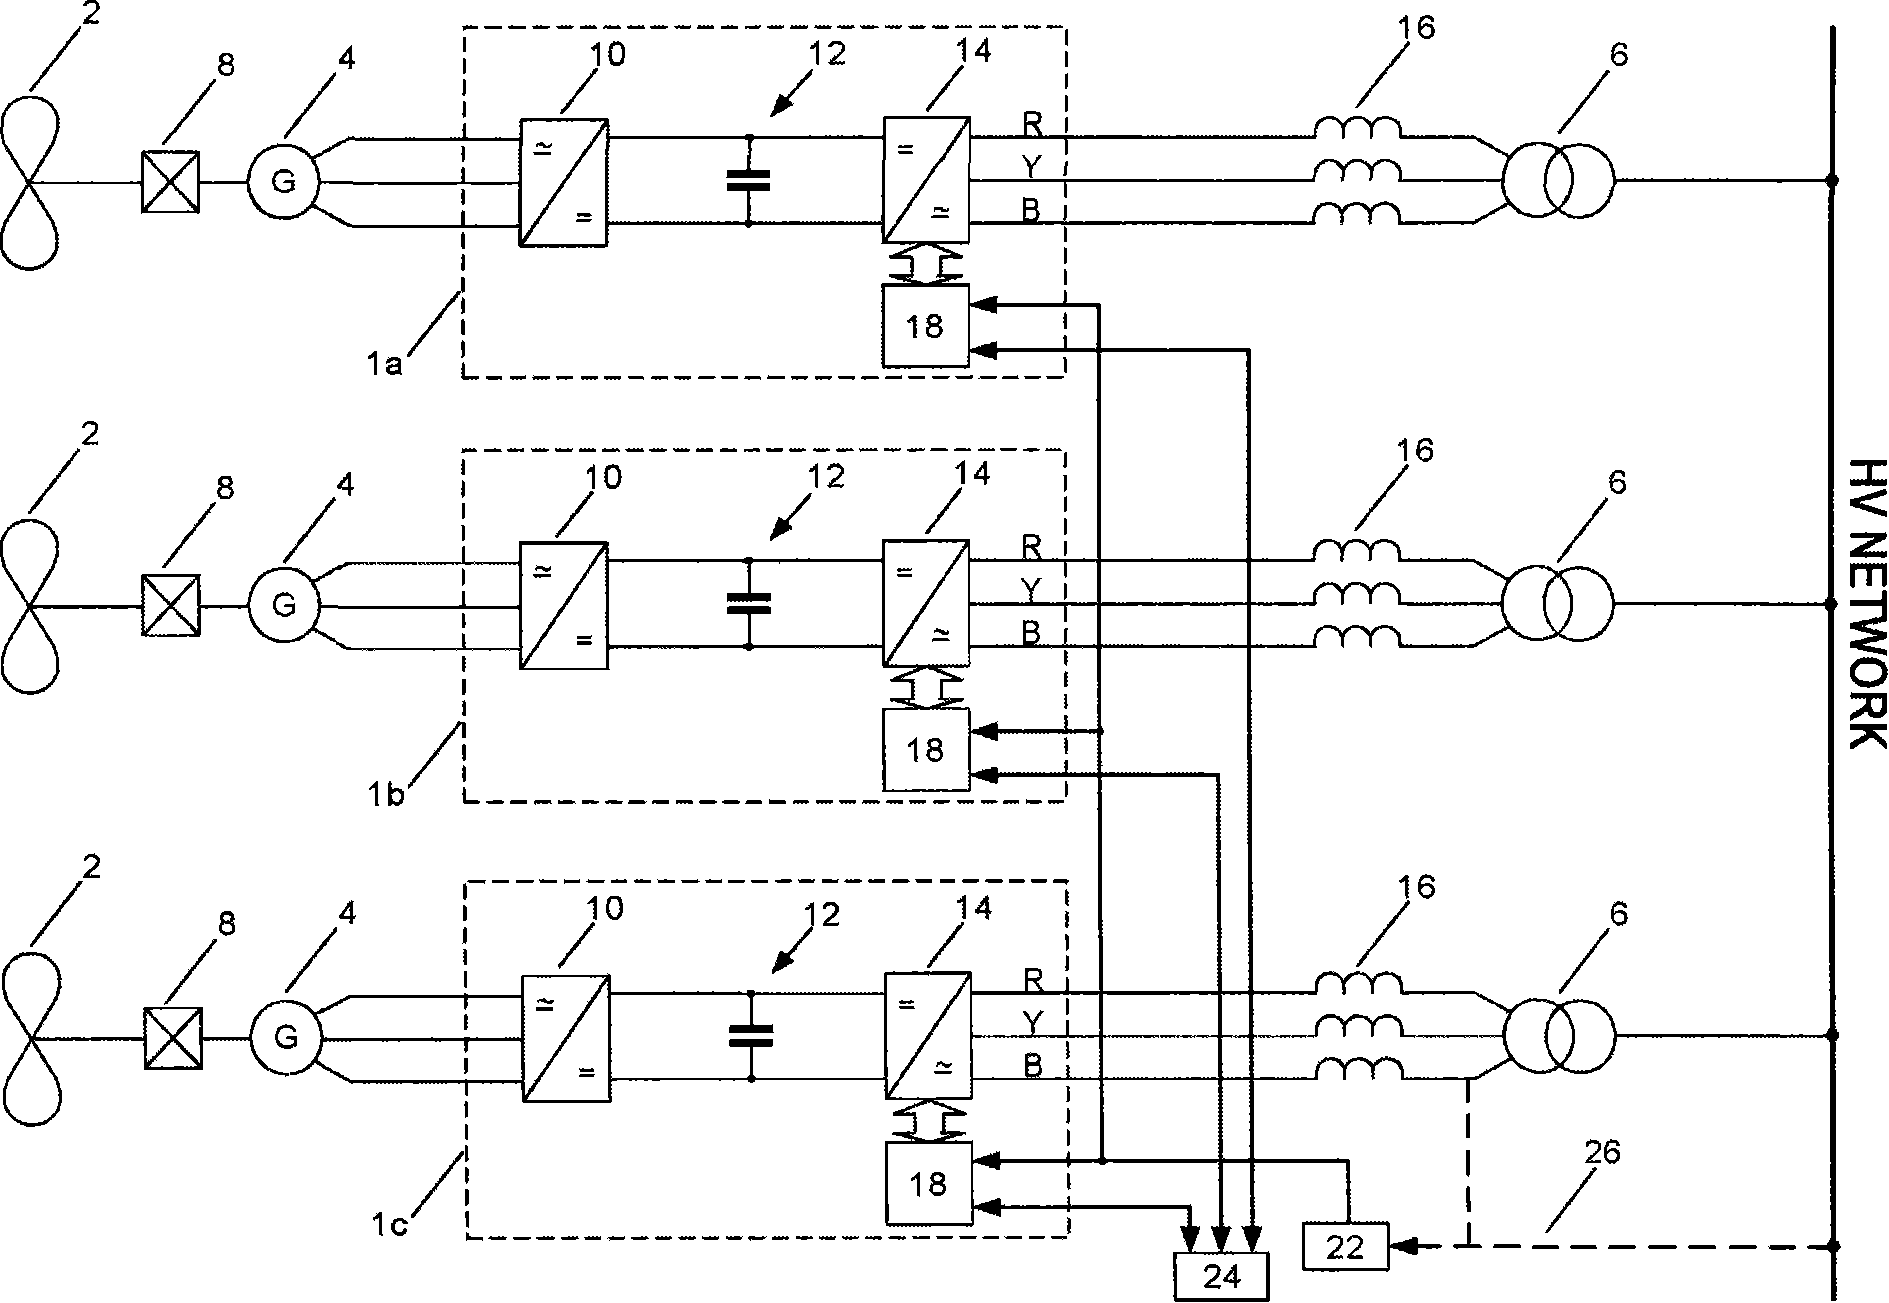 Control methods for the synchronization and phase shift of the pulse width modulation (PWM) strategy of power converters